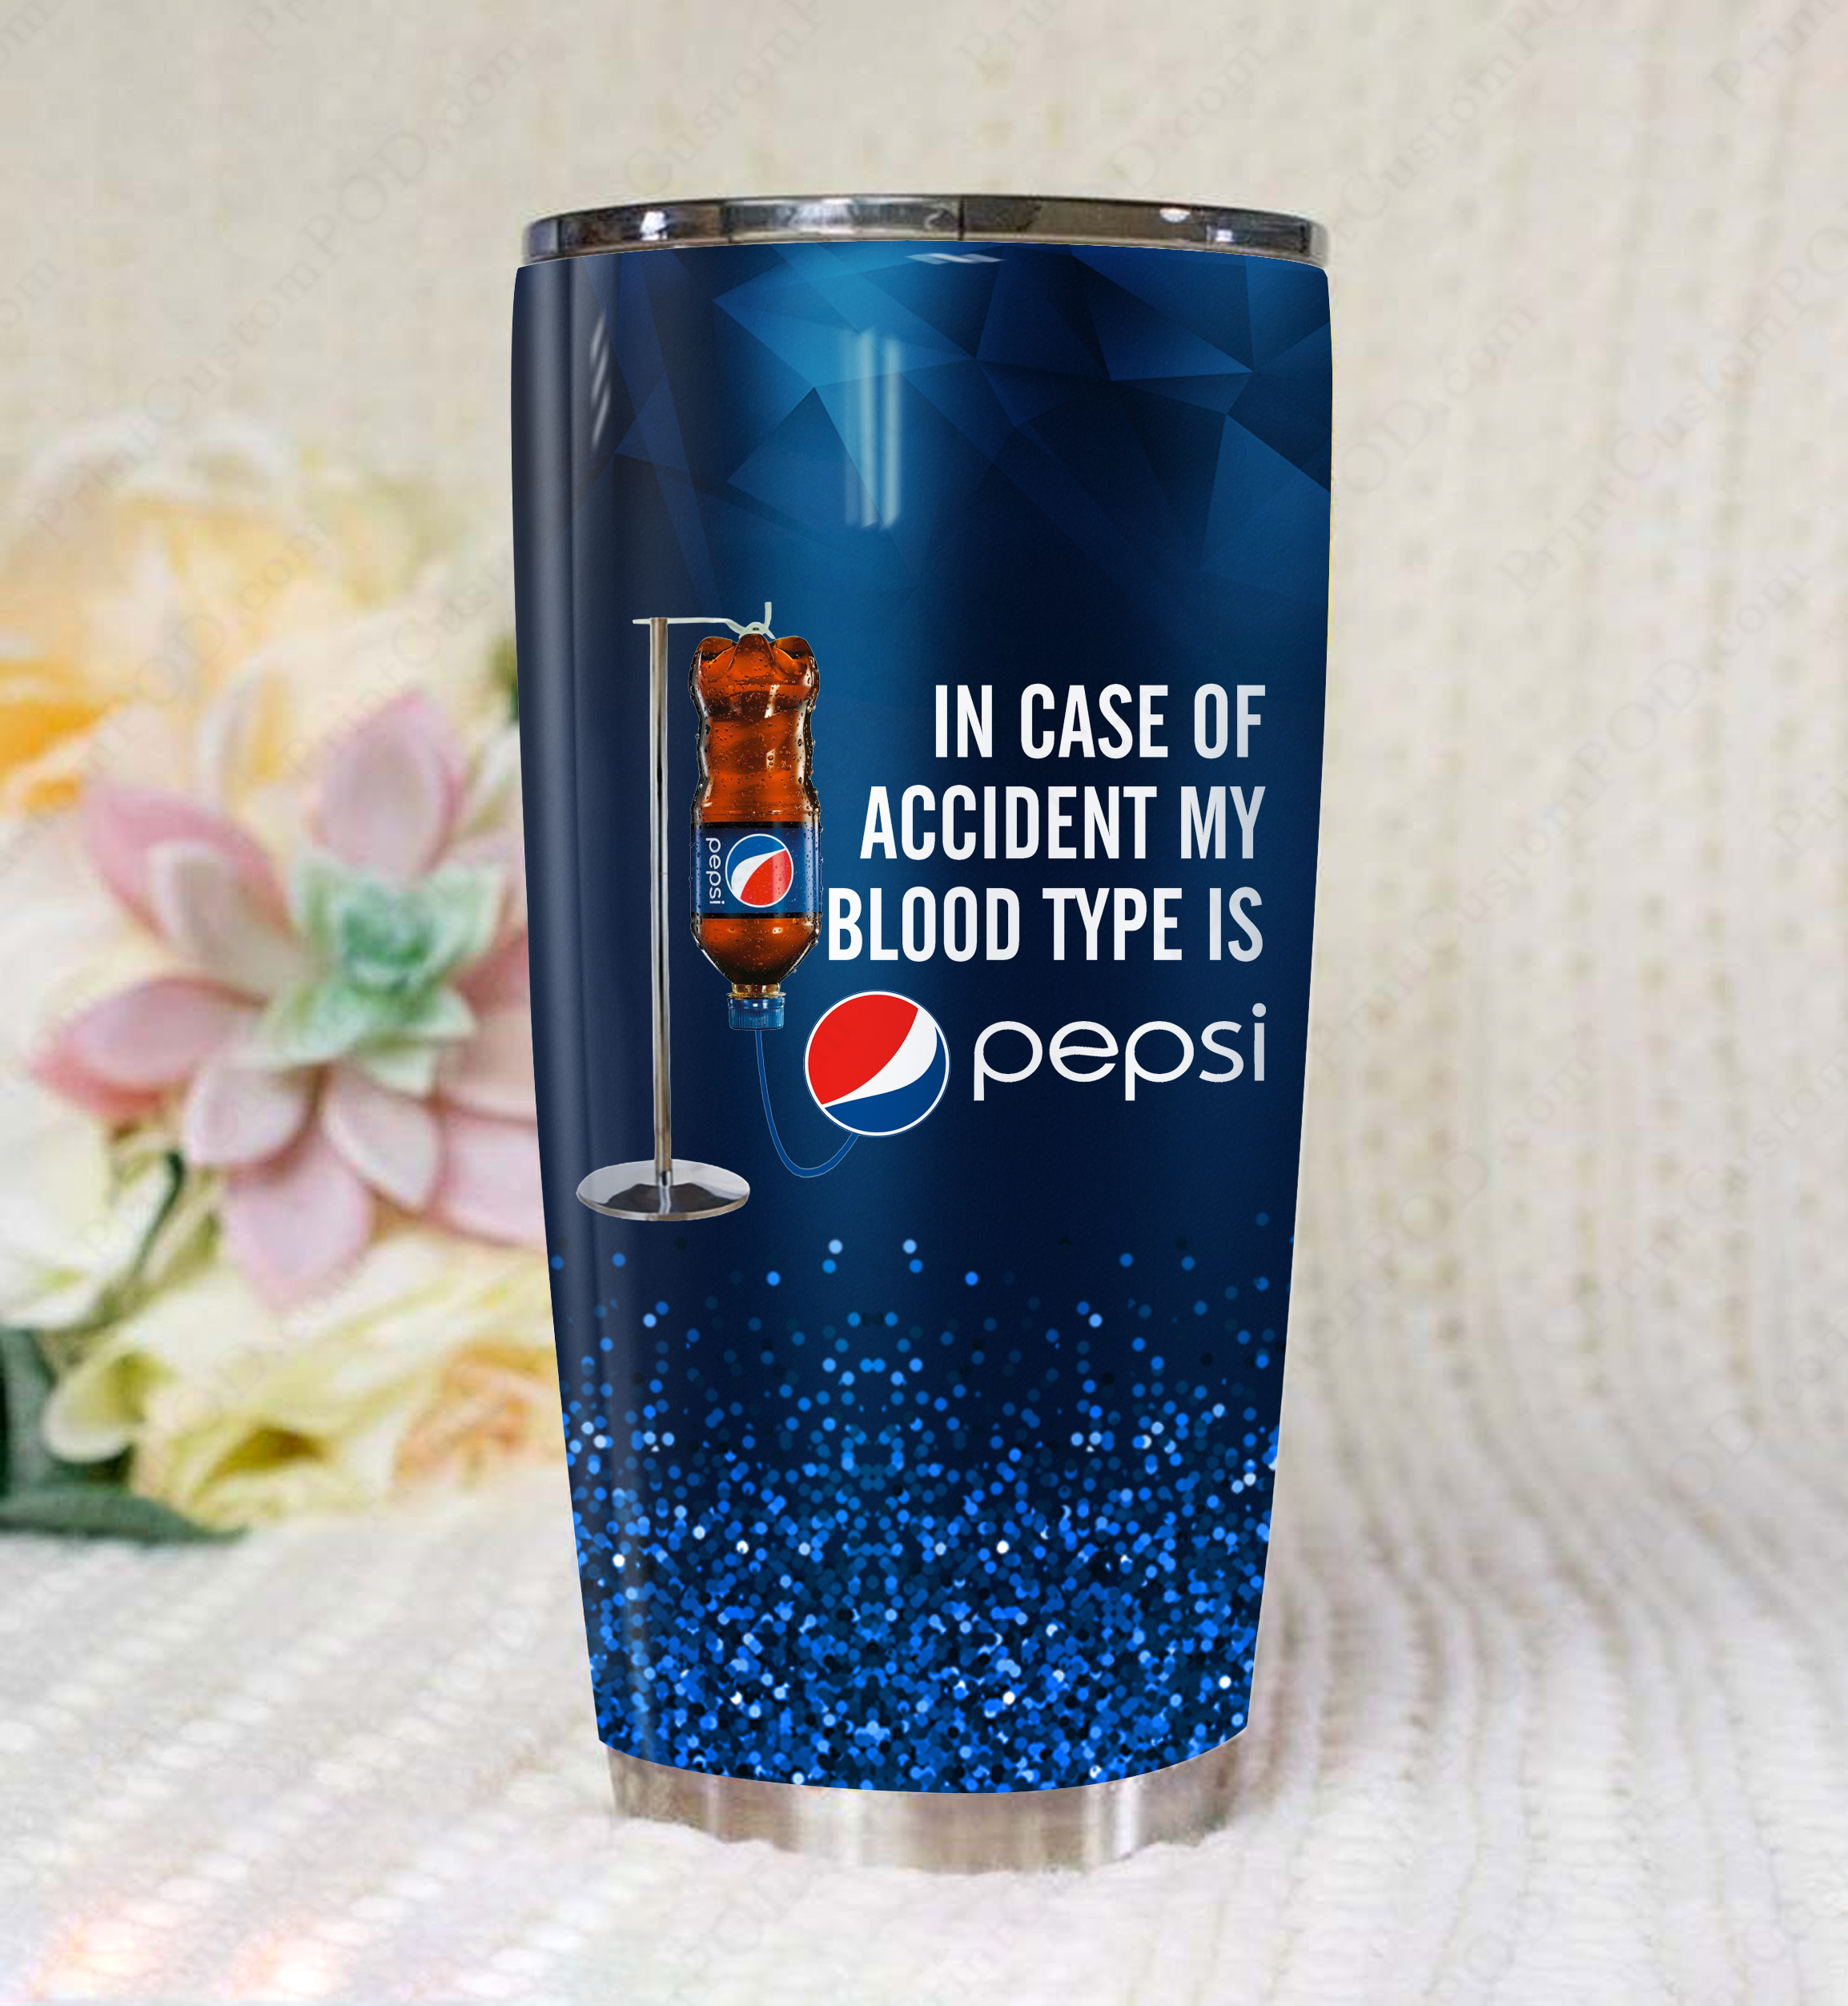 In case of an accident my blood type is pepsi full printing tumbler 4